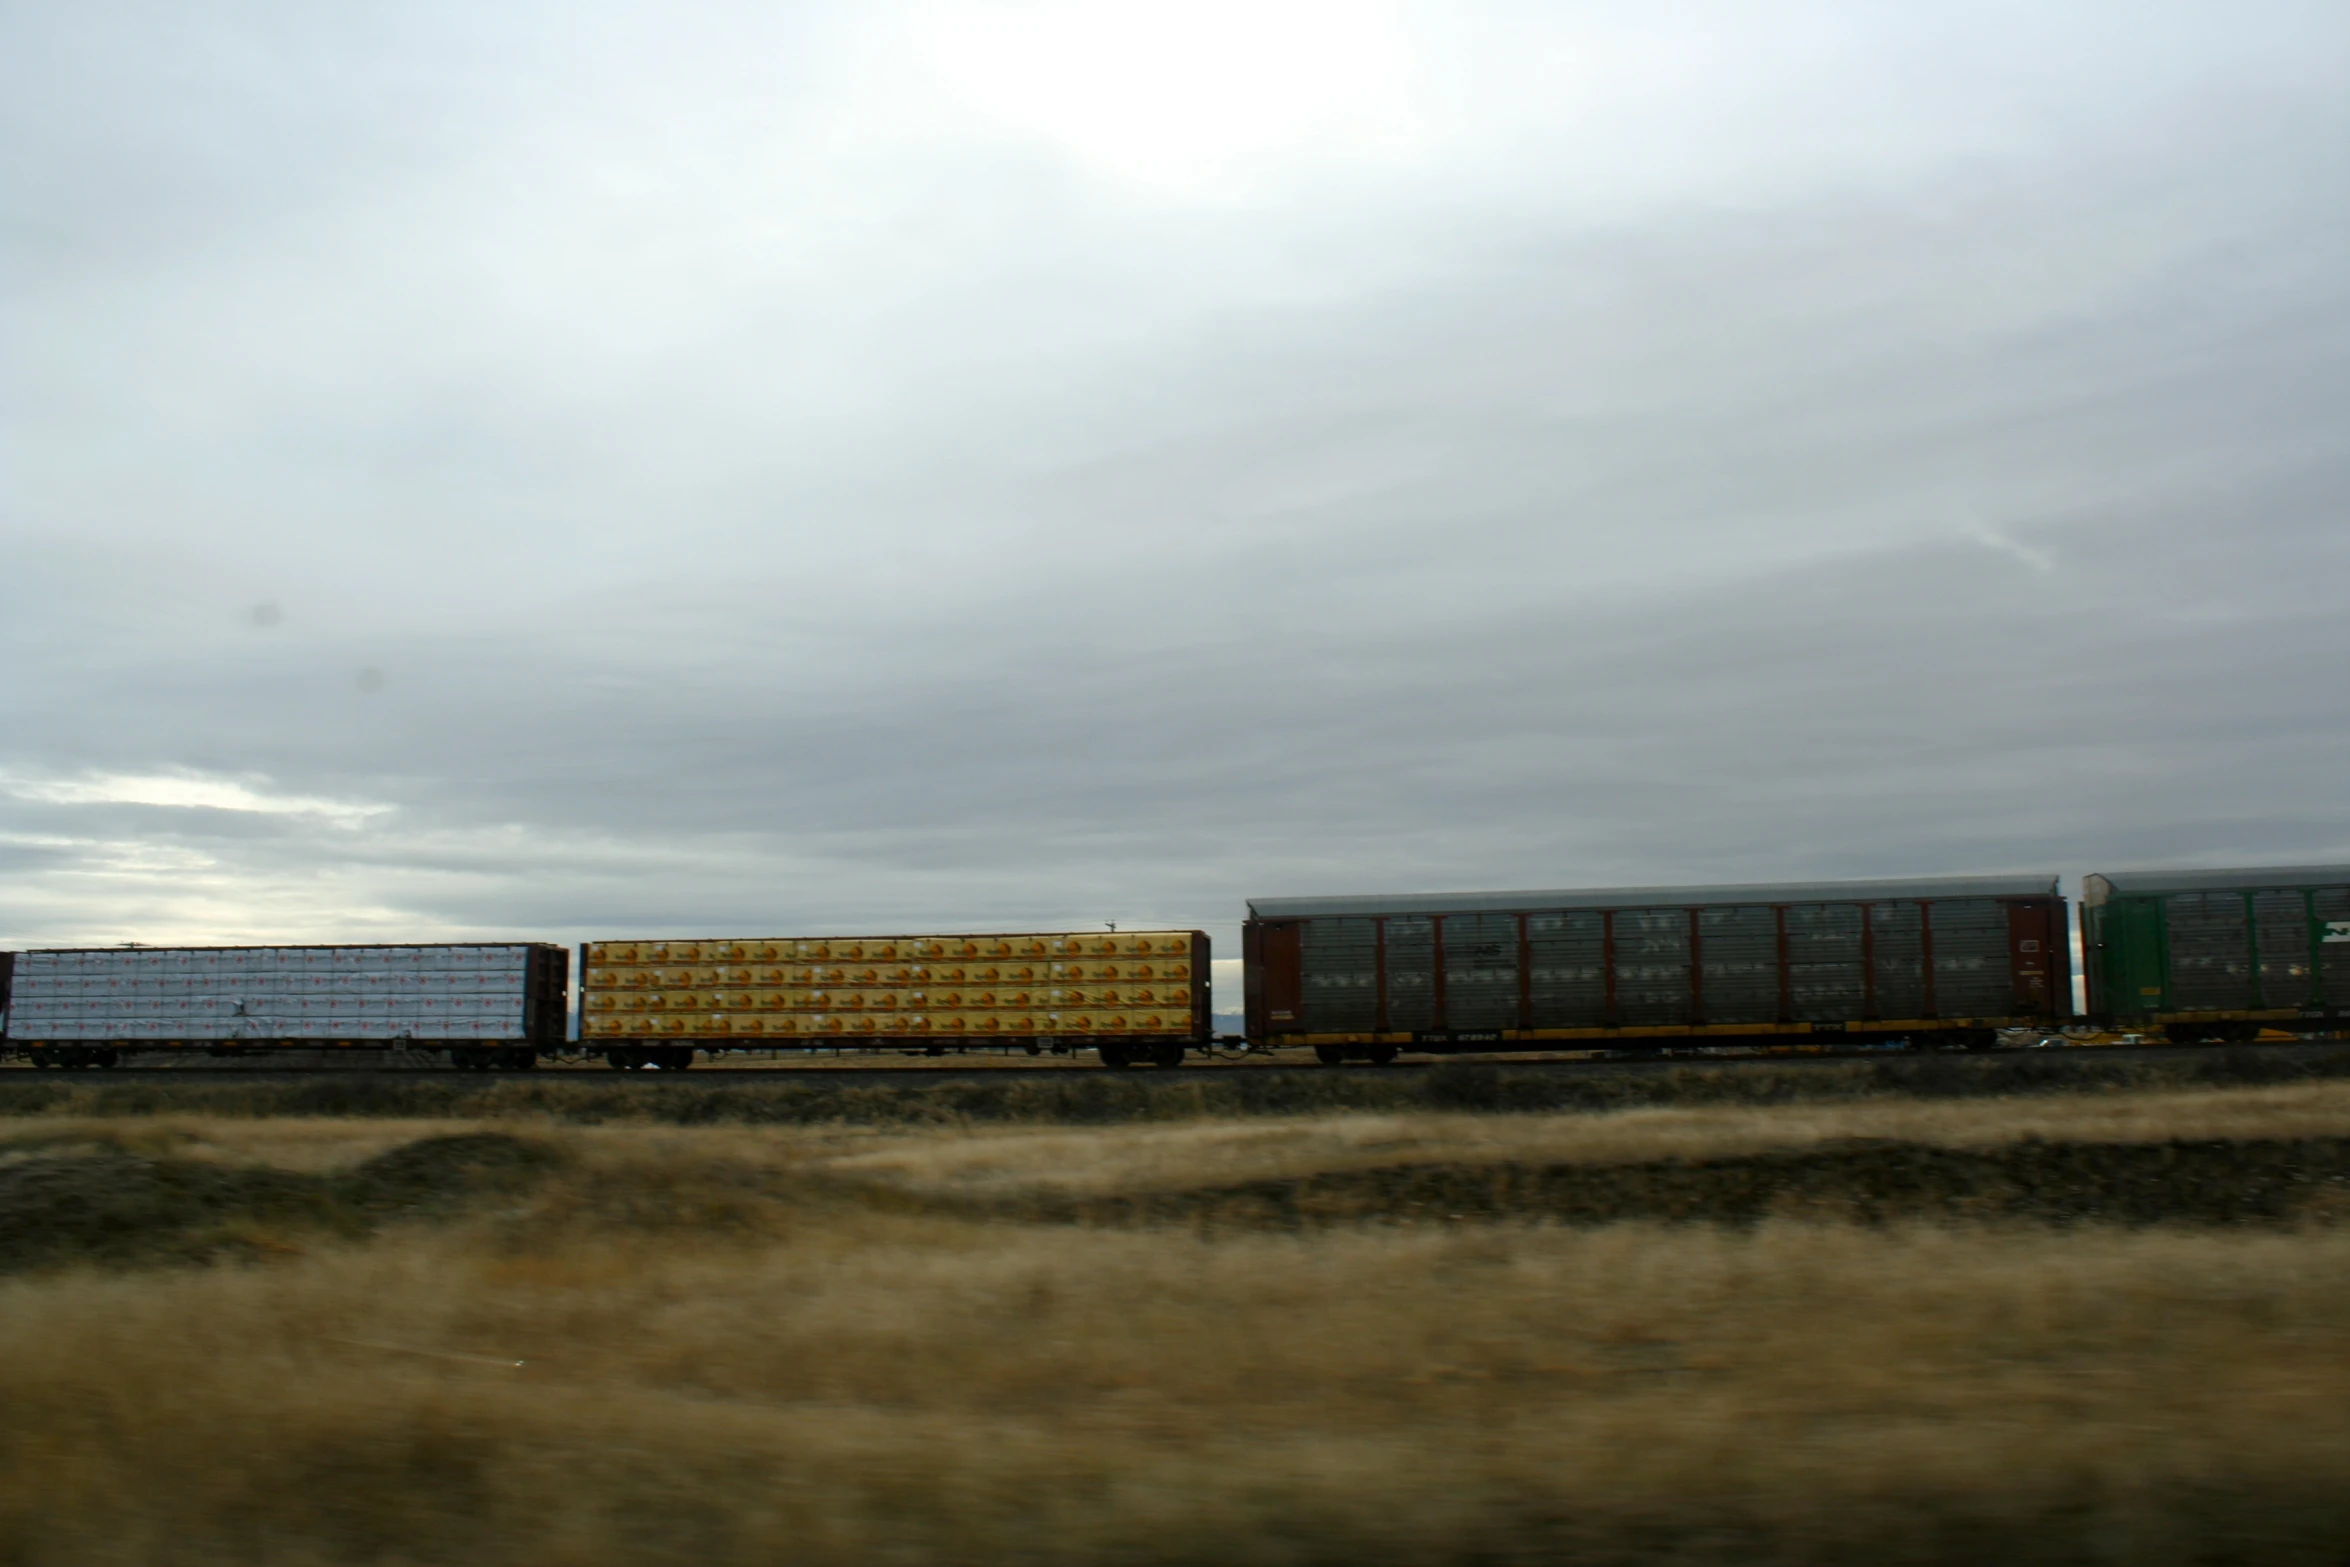 train cars traveling down tracks during cloudy day